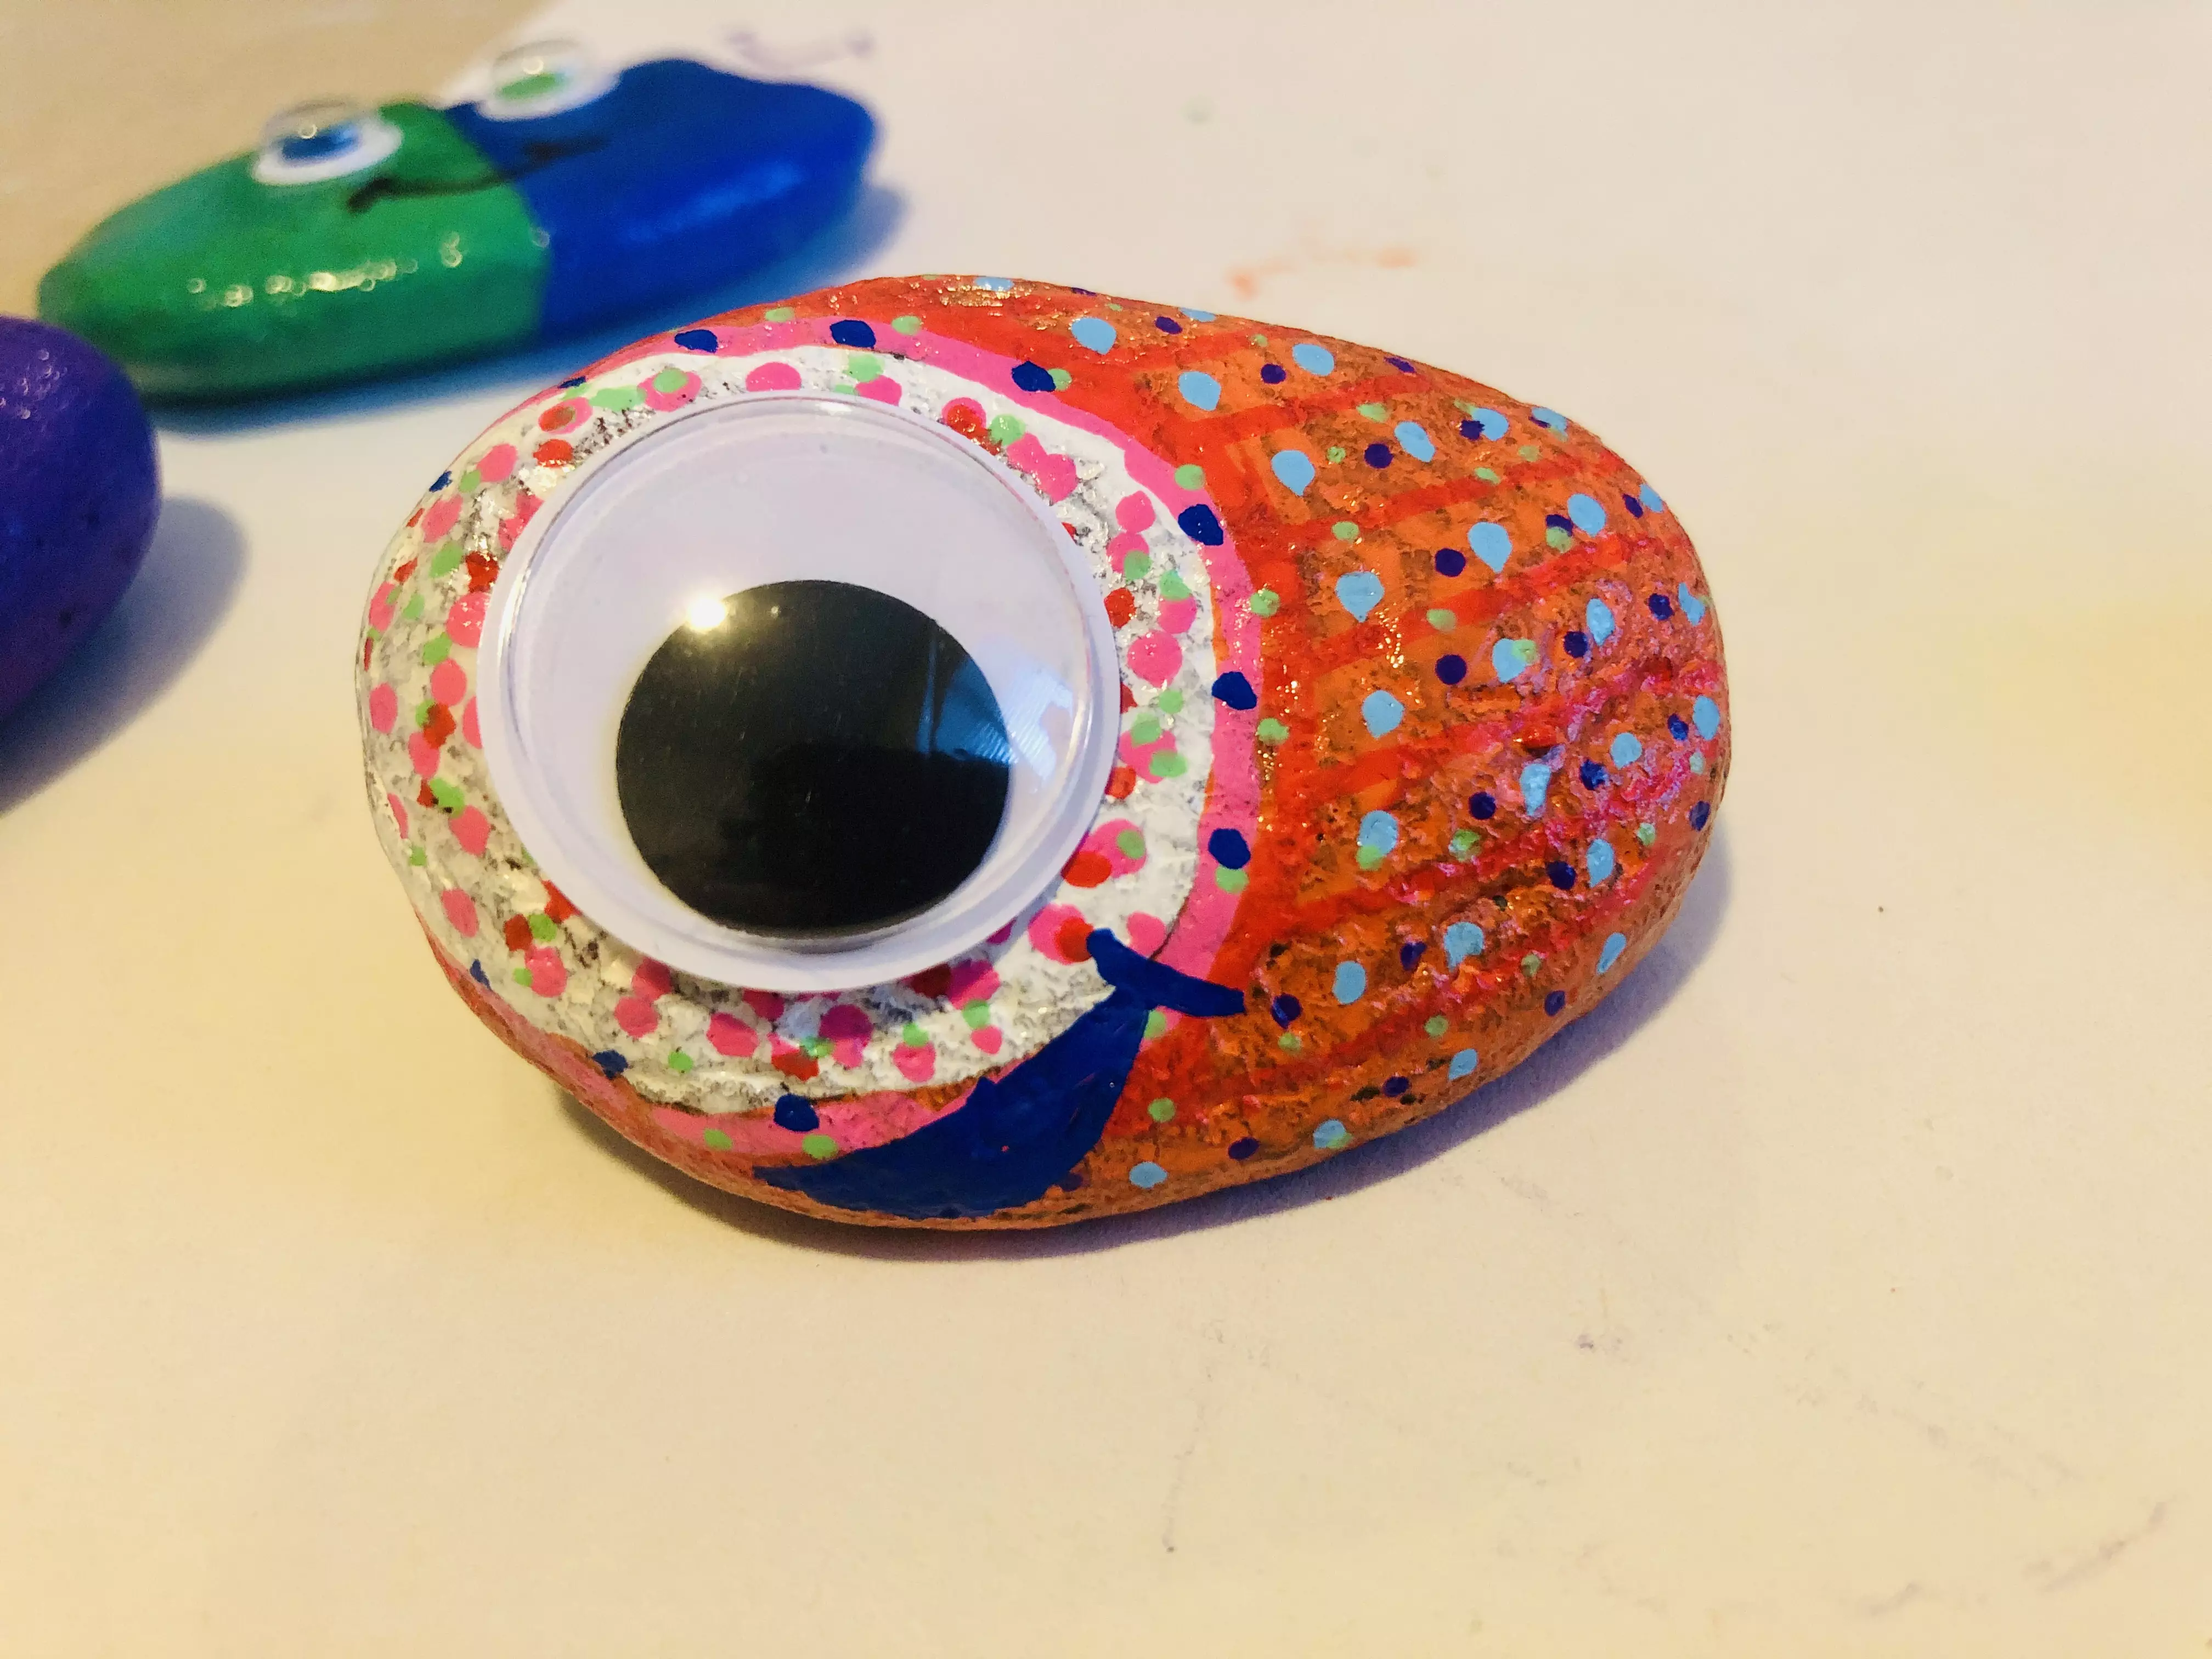 painted pet rock craft example